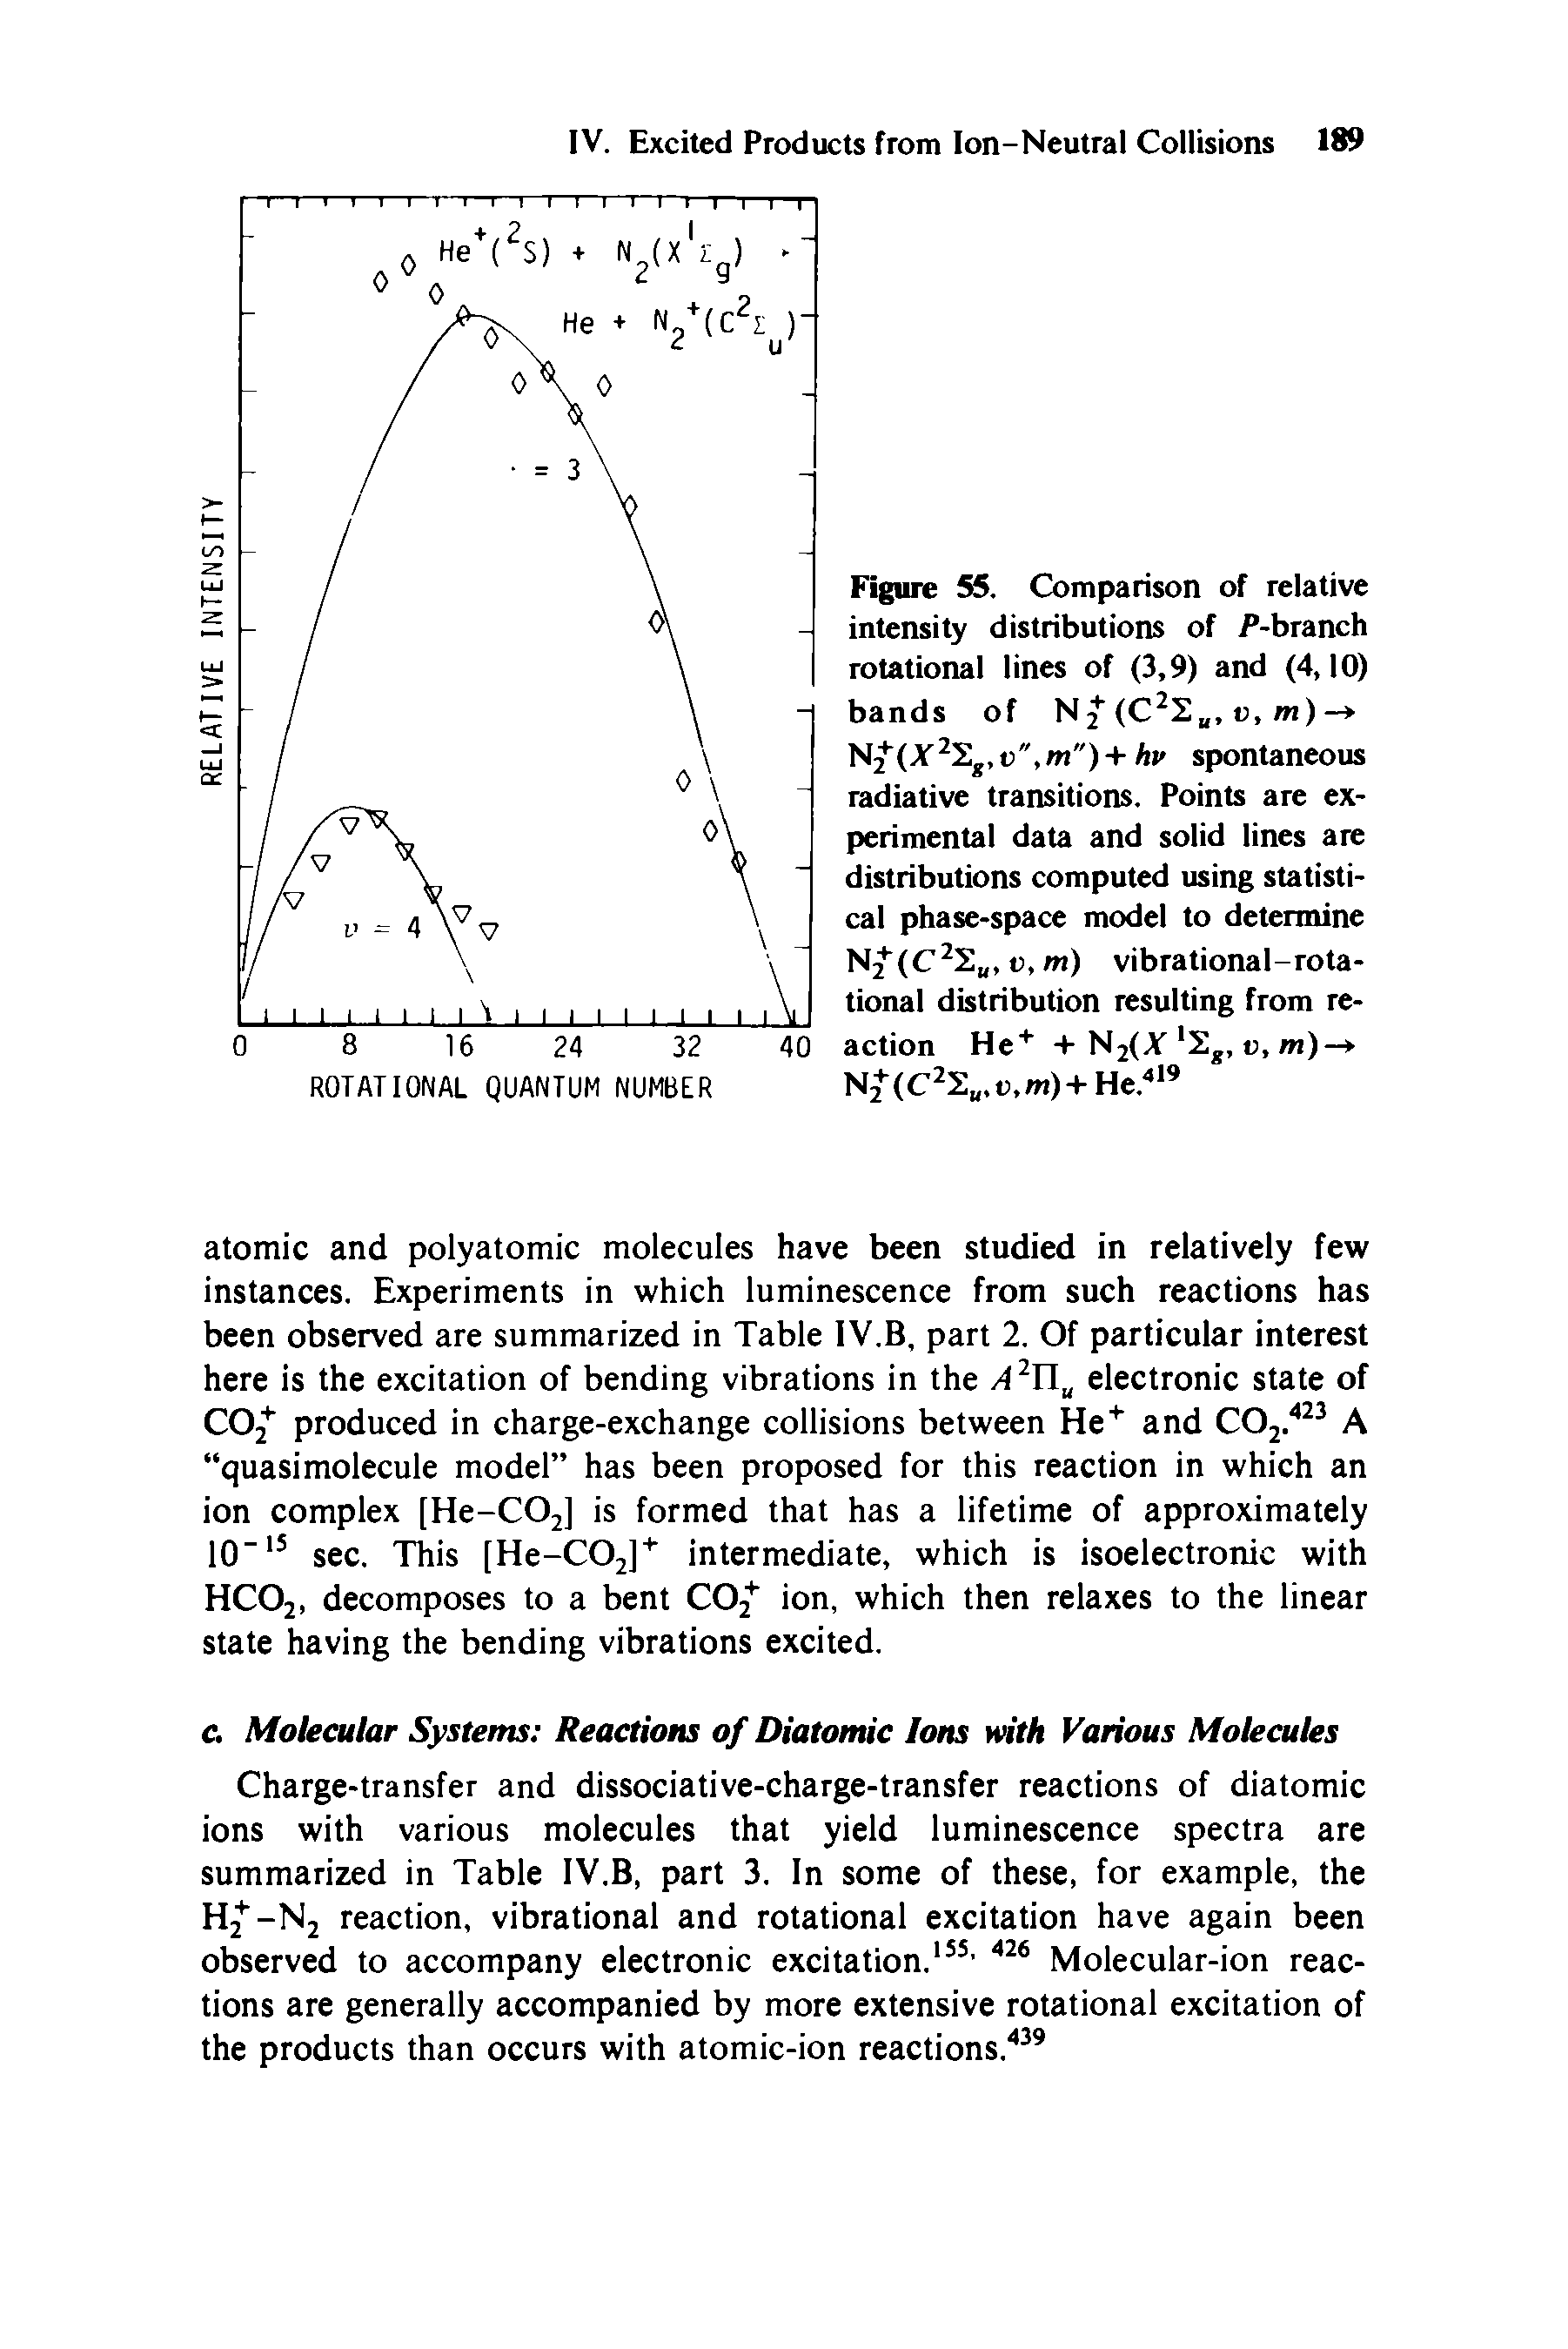 Figure 55. Comparison of relative intensity distributions of P-branch rotational lines of (3,9) and (4,10) bands of N2+ (C22 , e, m)-> N2+(V25>", m ) + hv spontaneous radiative transitions. Points are experimental data and solid lines are distributions computed using statistical phase-space model to determine N2 (C221), v, m) vibrational-rotational distribution resulting from reaction He+ + N2(V 2g, v, m)— N2+(C22M,o,m)+He.419...